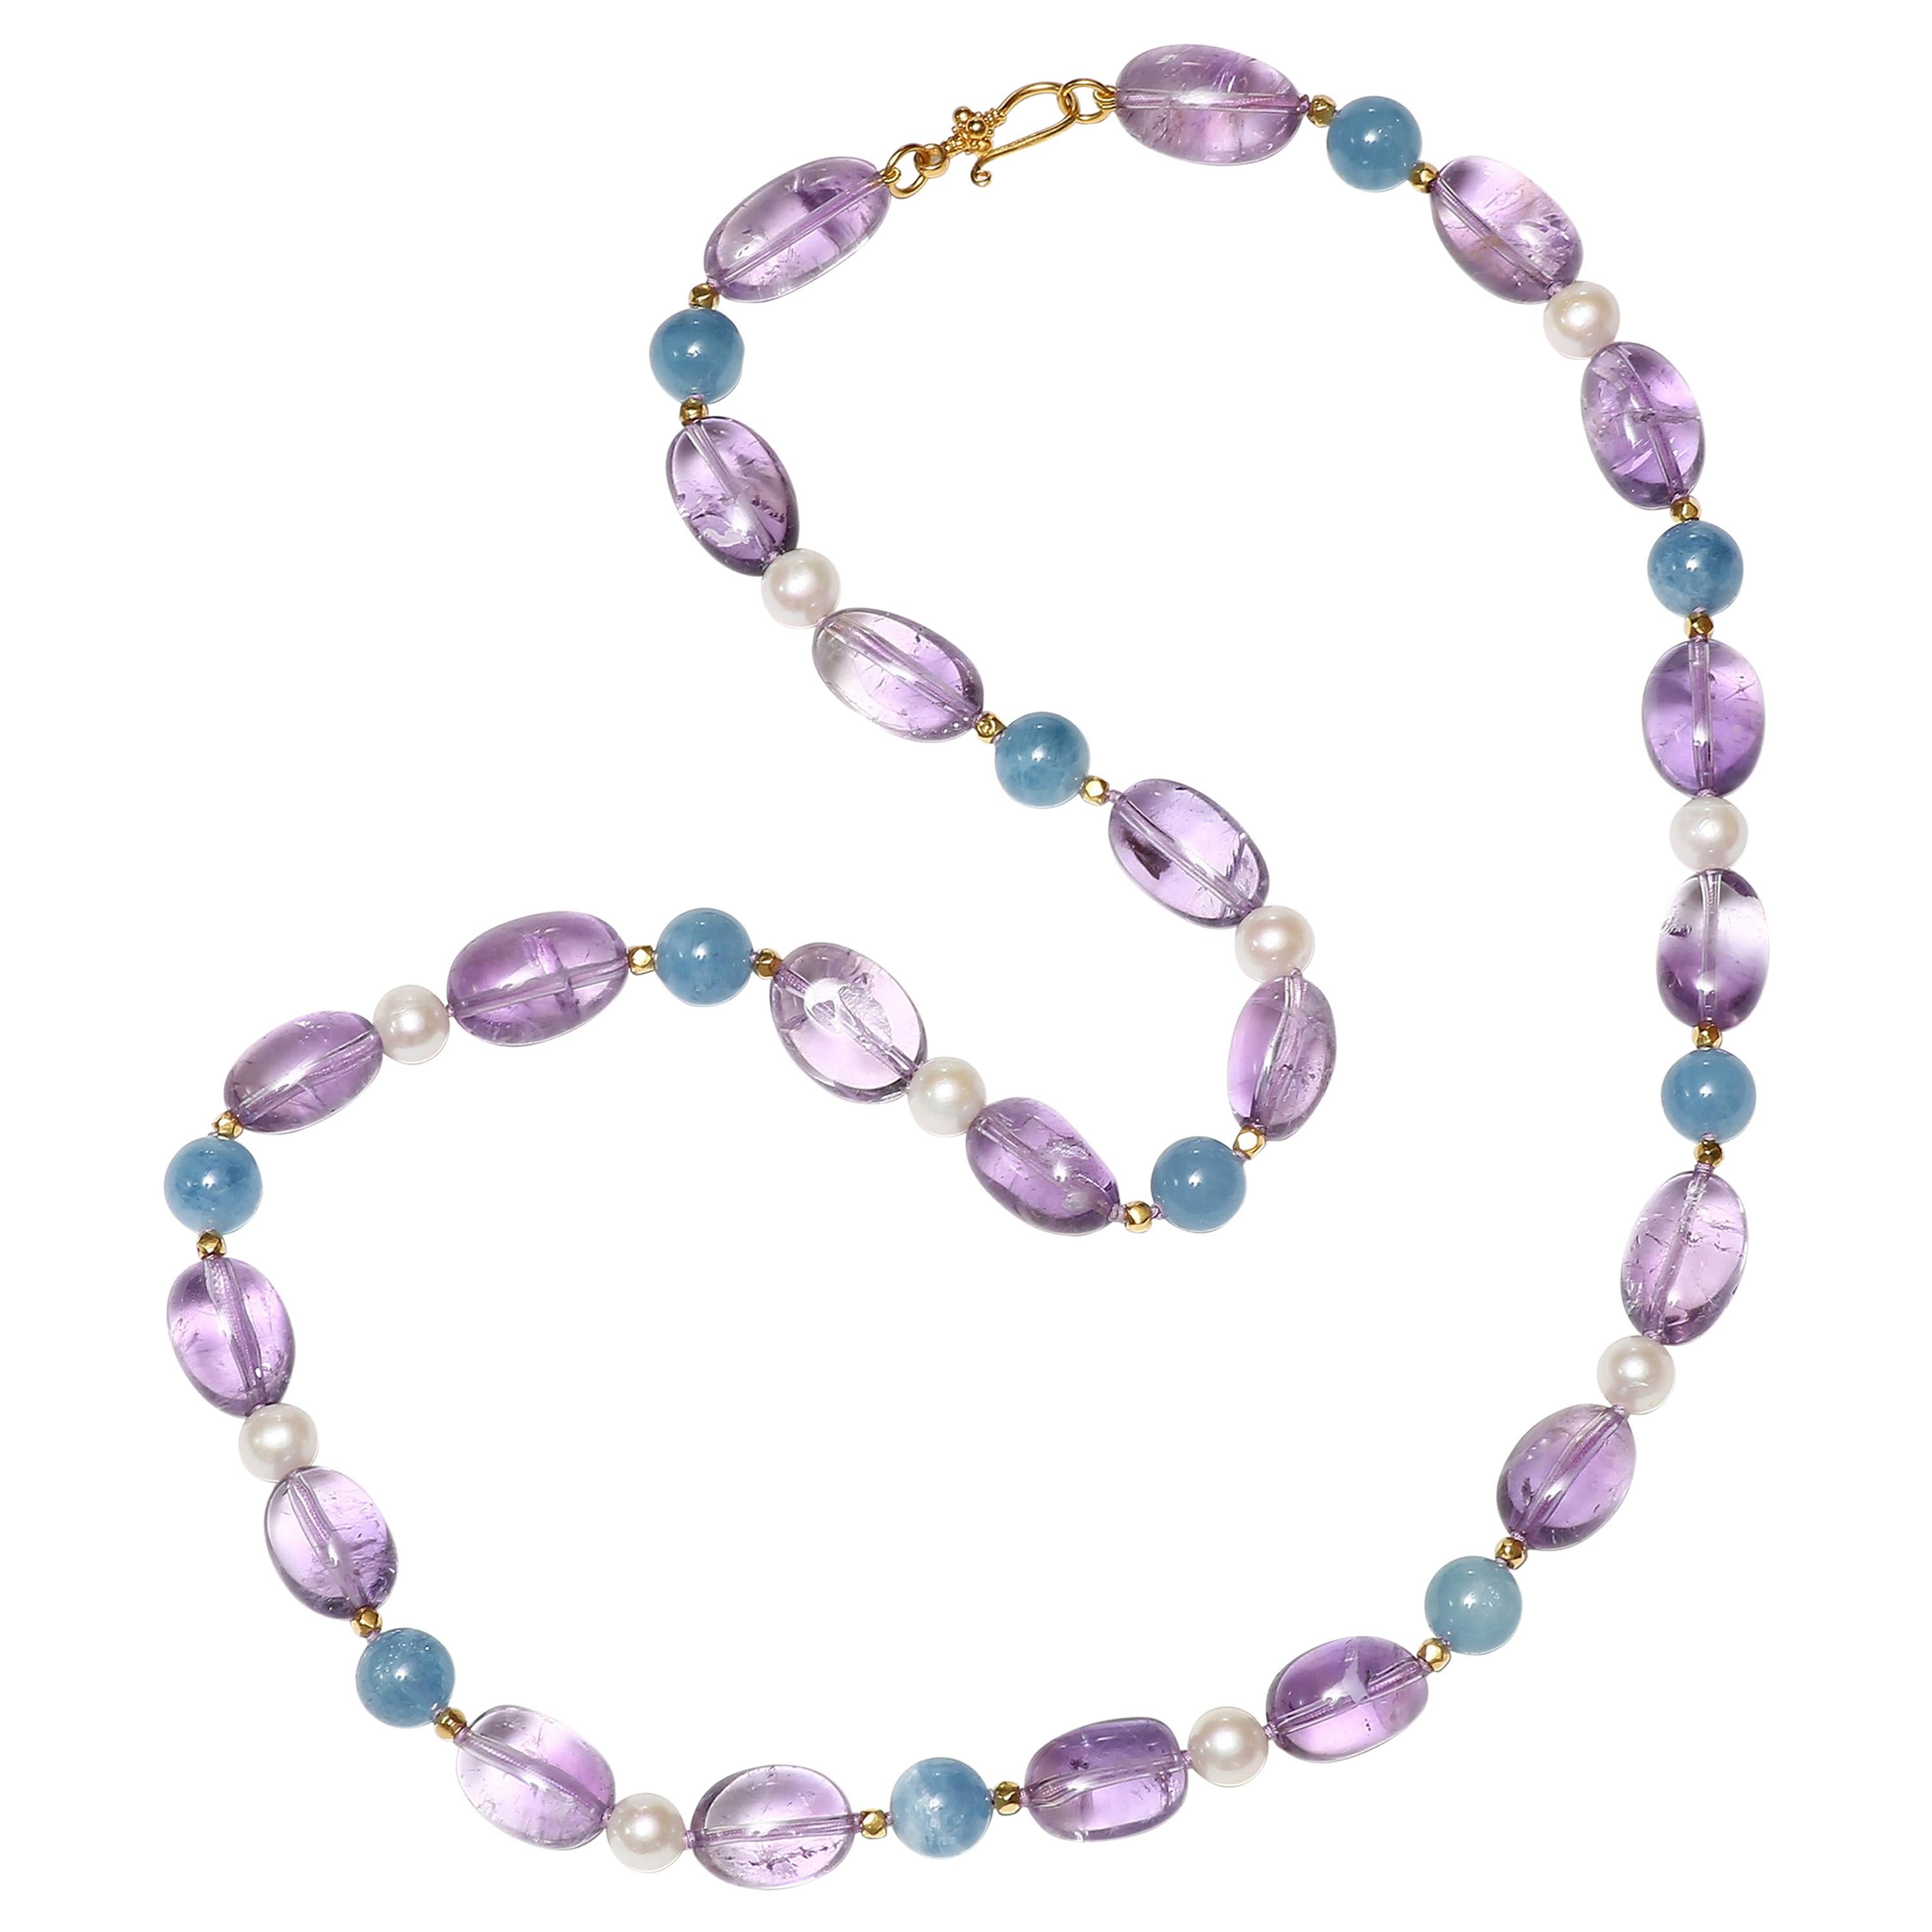 Aquamarine, Amethyst and Freshwater Pearl Necklace